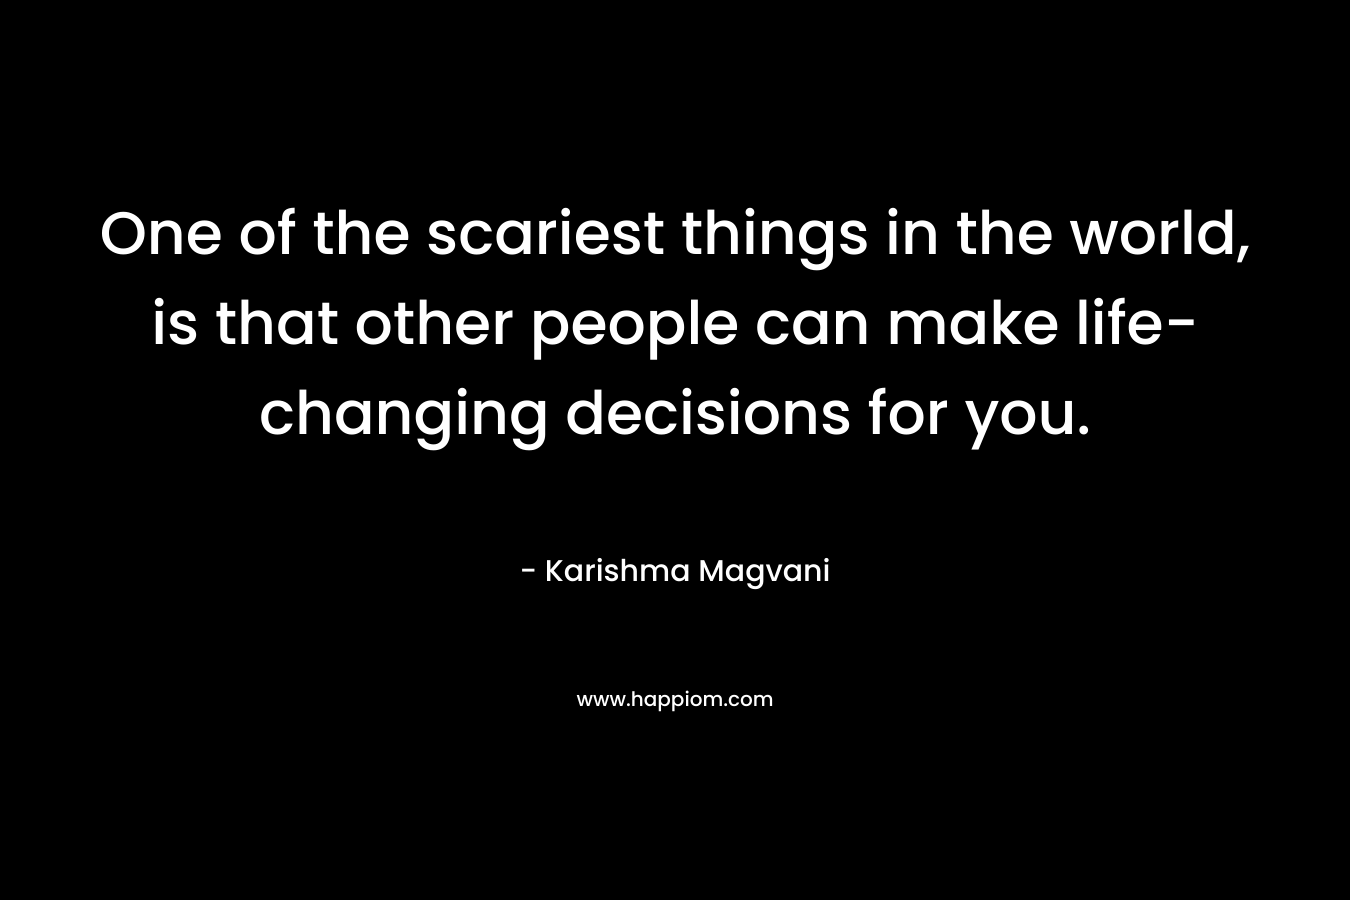 One of the scariest things in the world, is that other people can make life-changing decisions for you. – Karishma Magvani